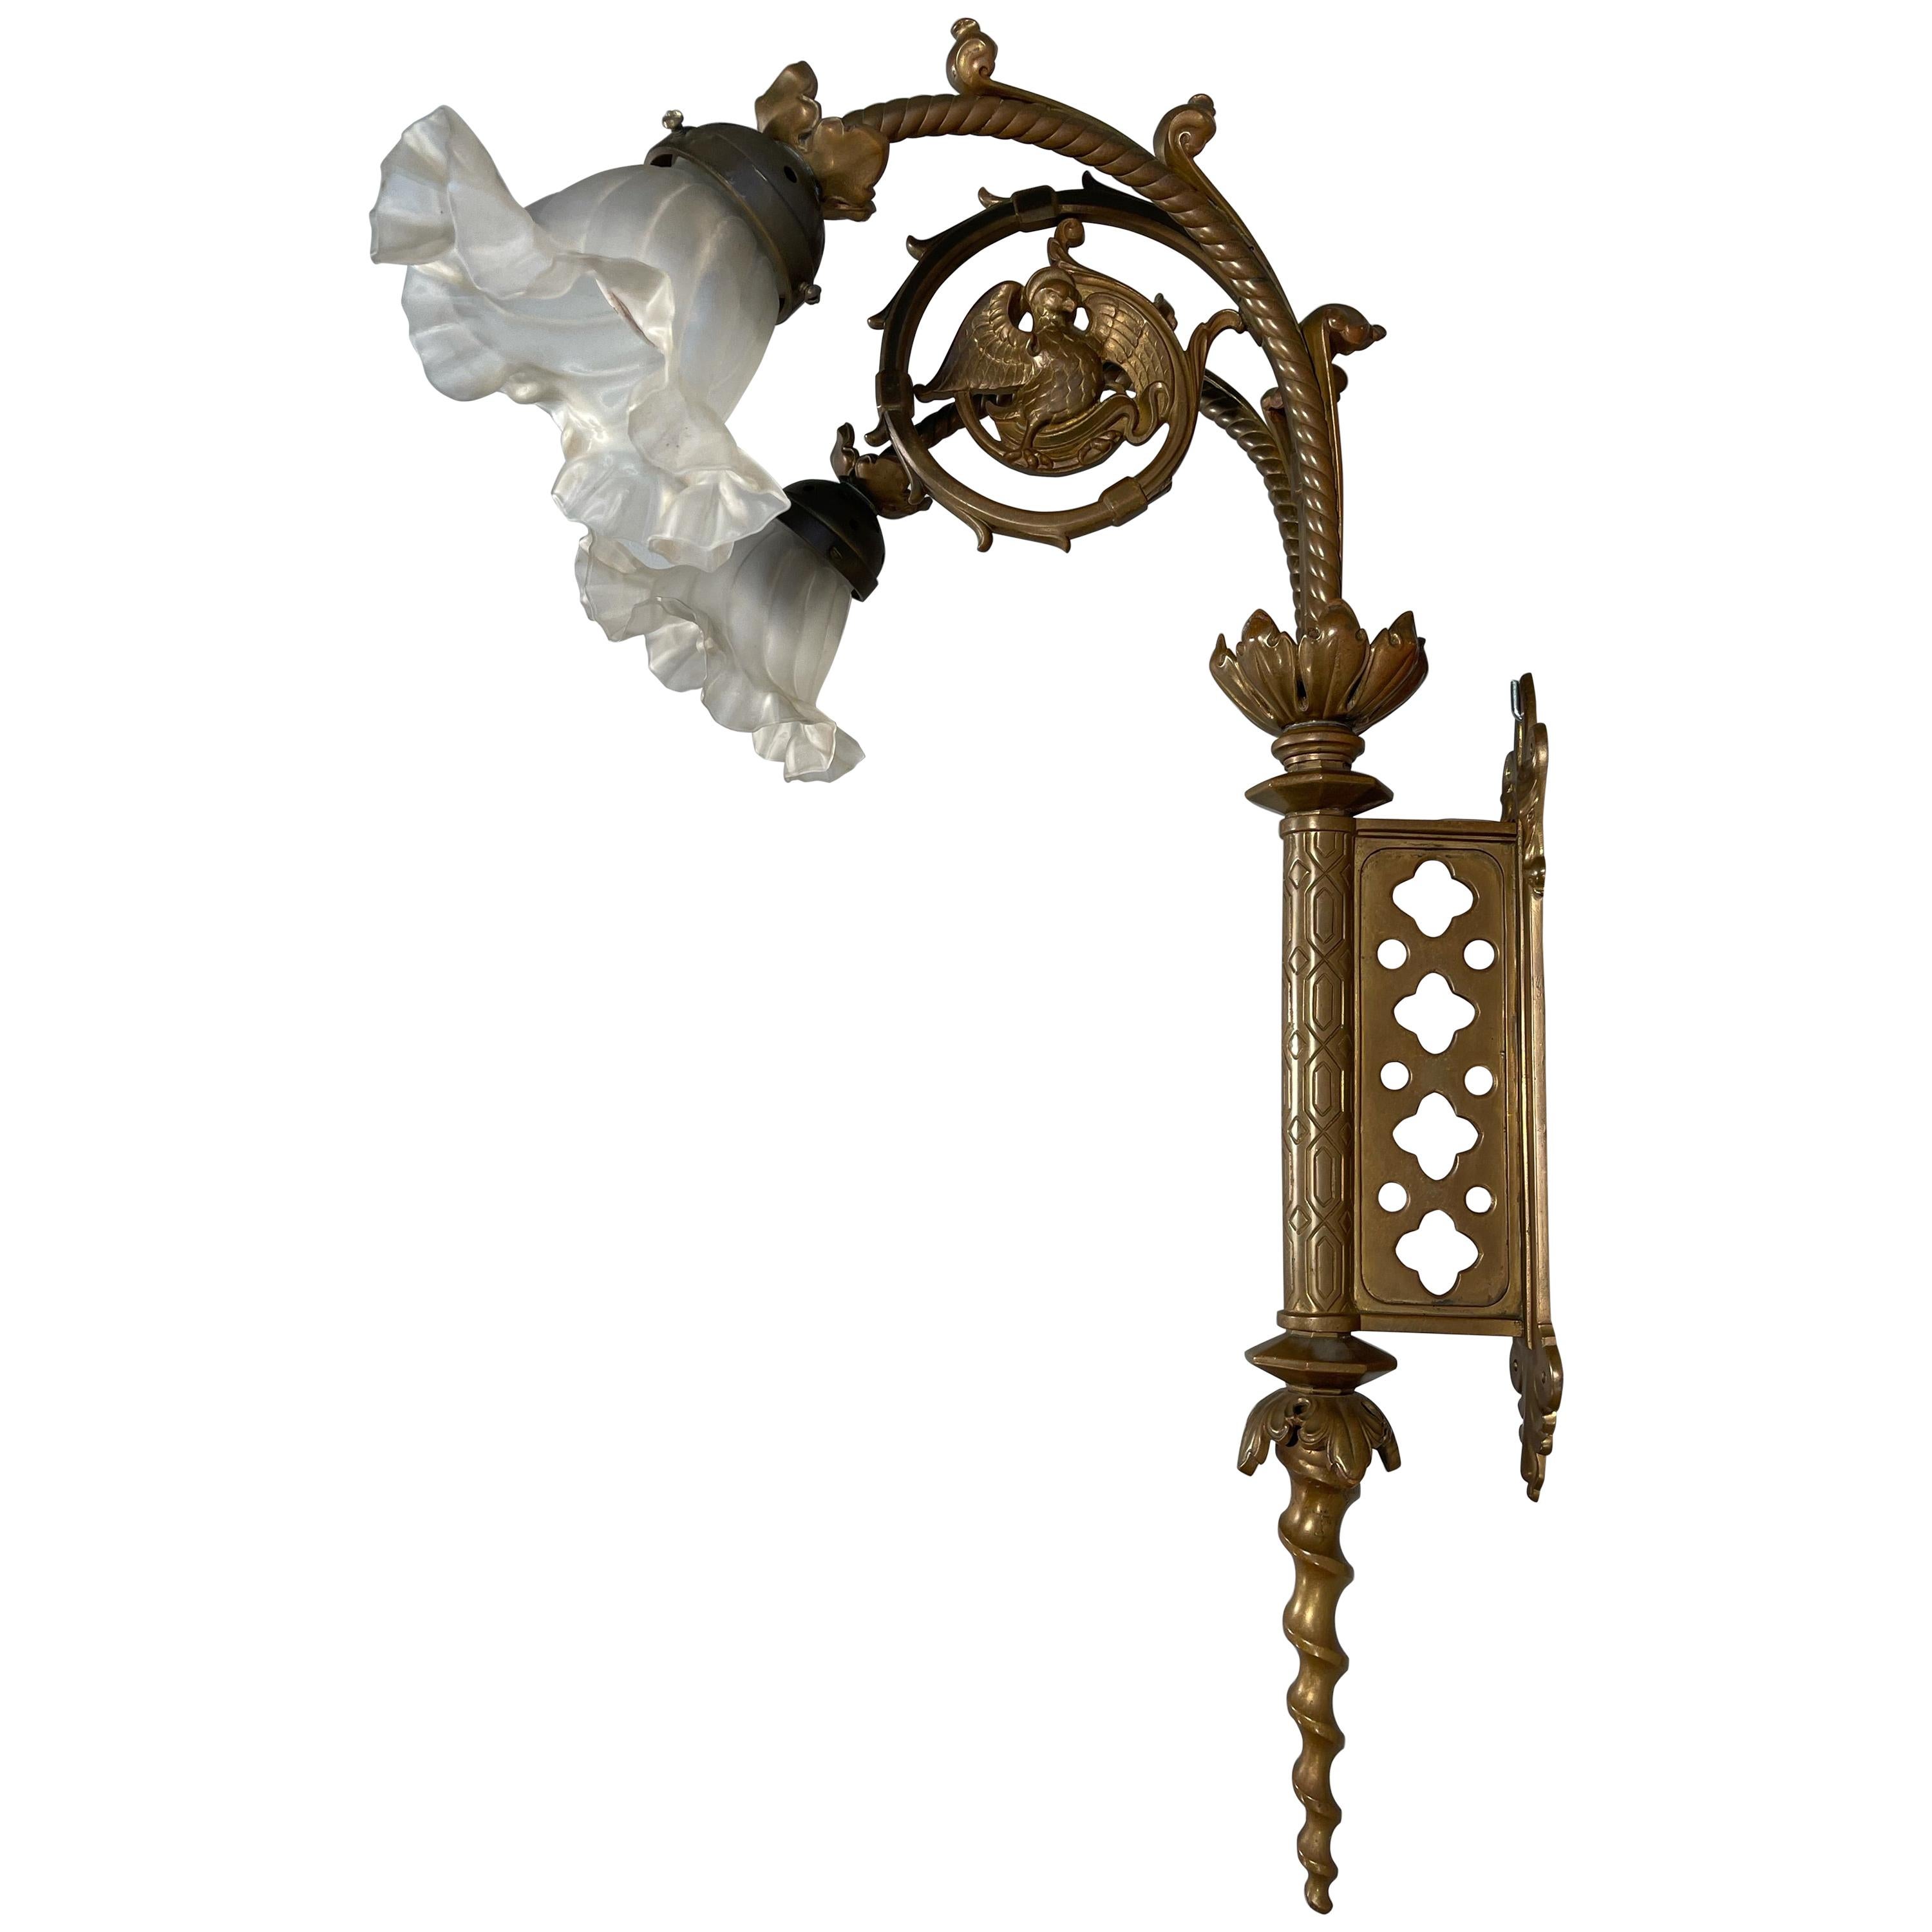 Unique Large and Great Quality Gothic Revival Solid Bronze Two-Light Wall Sconce